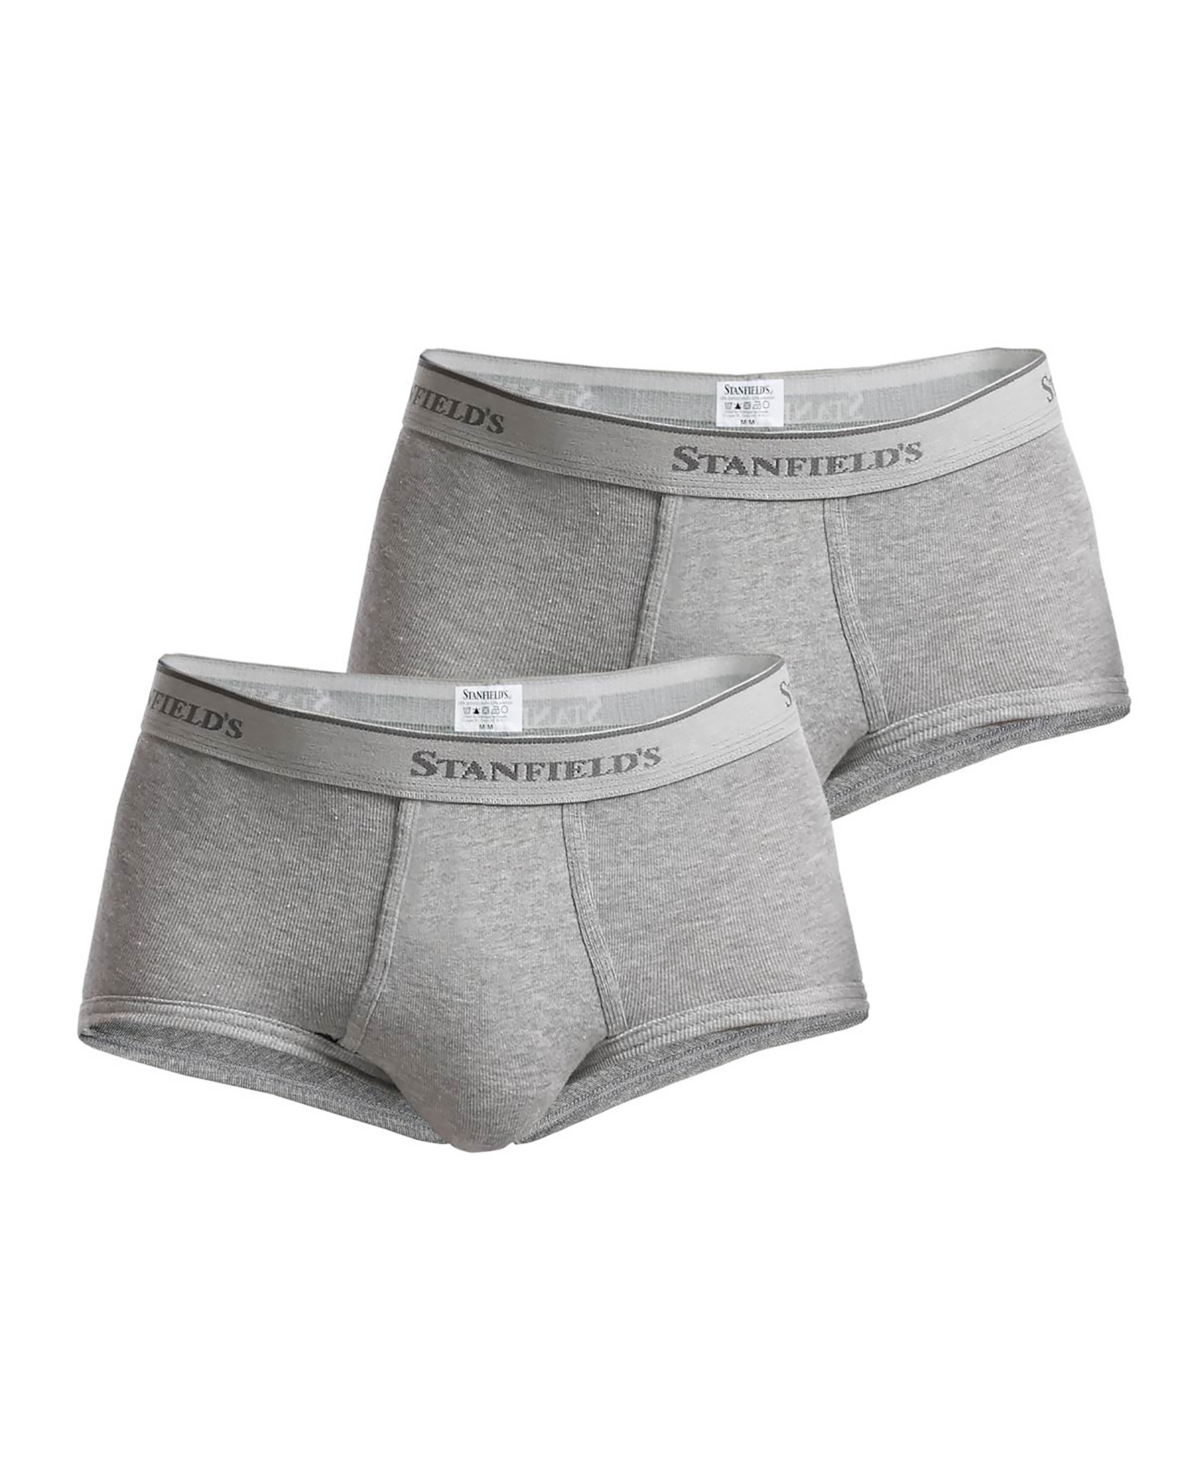 Stanfield's Men's Supreme Cotton Blend Regular Rise Briefs, Pack Of 2 In  Gray Mix